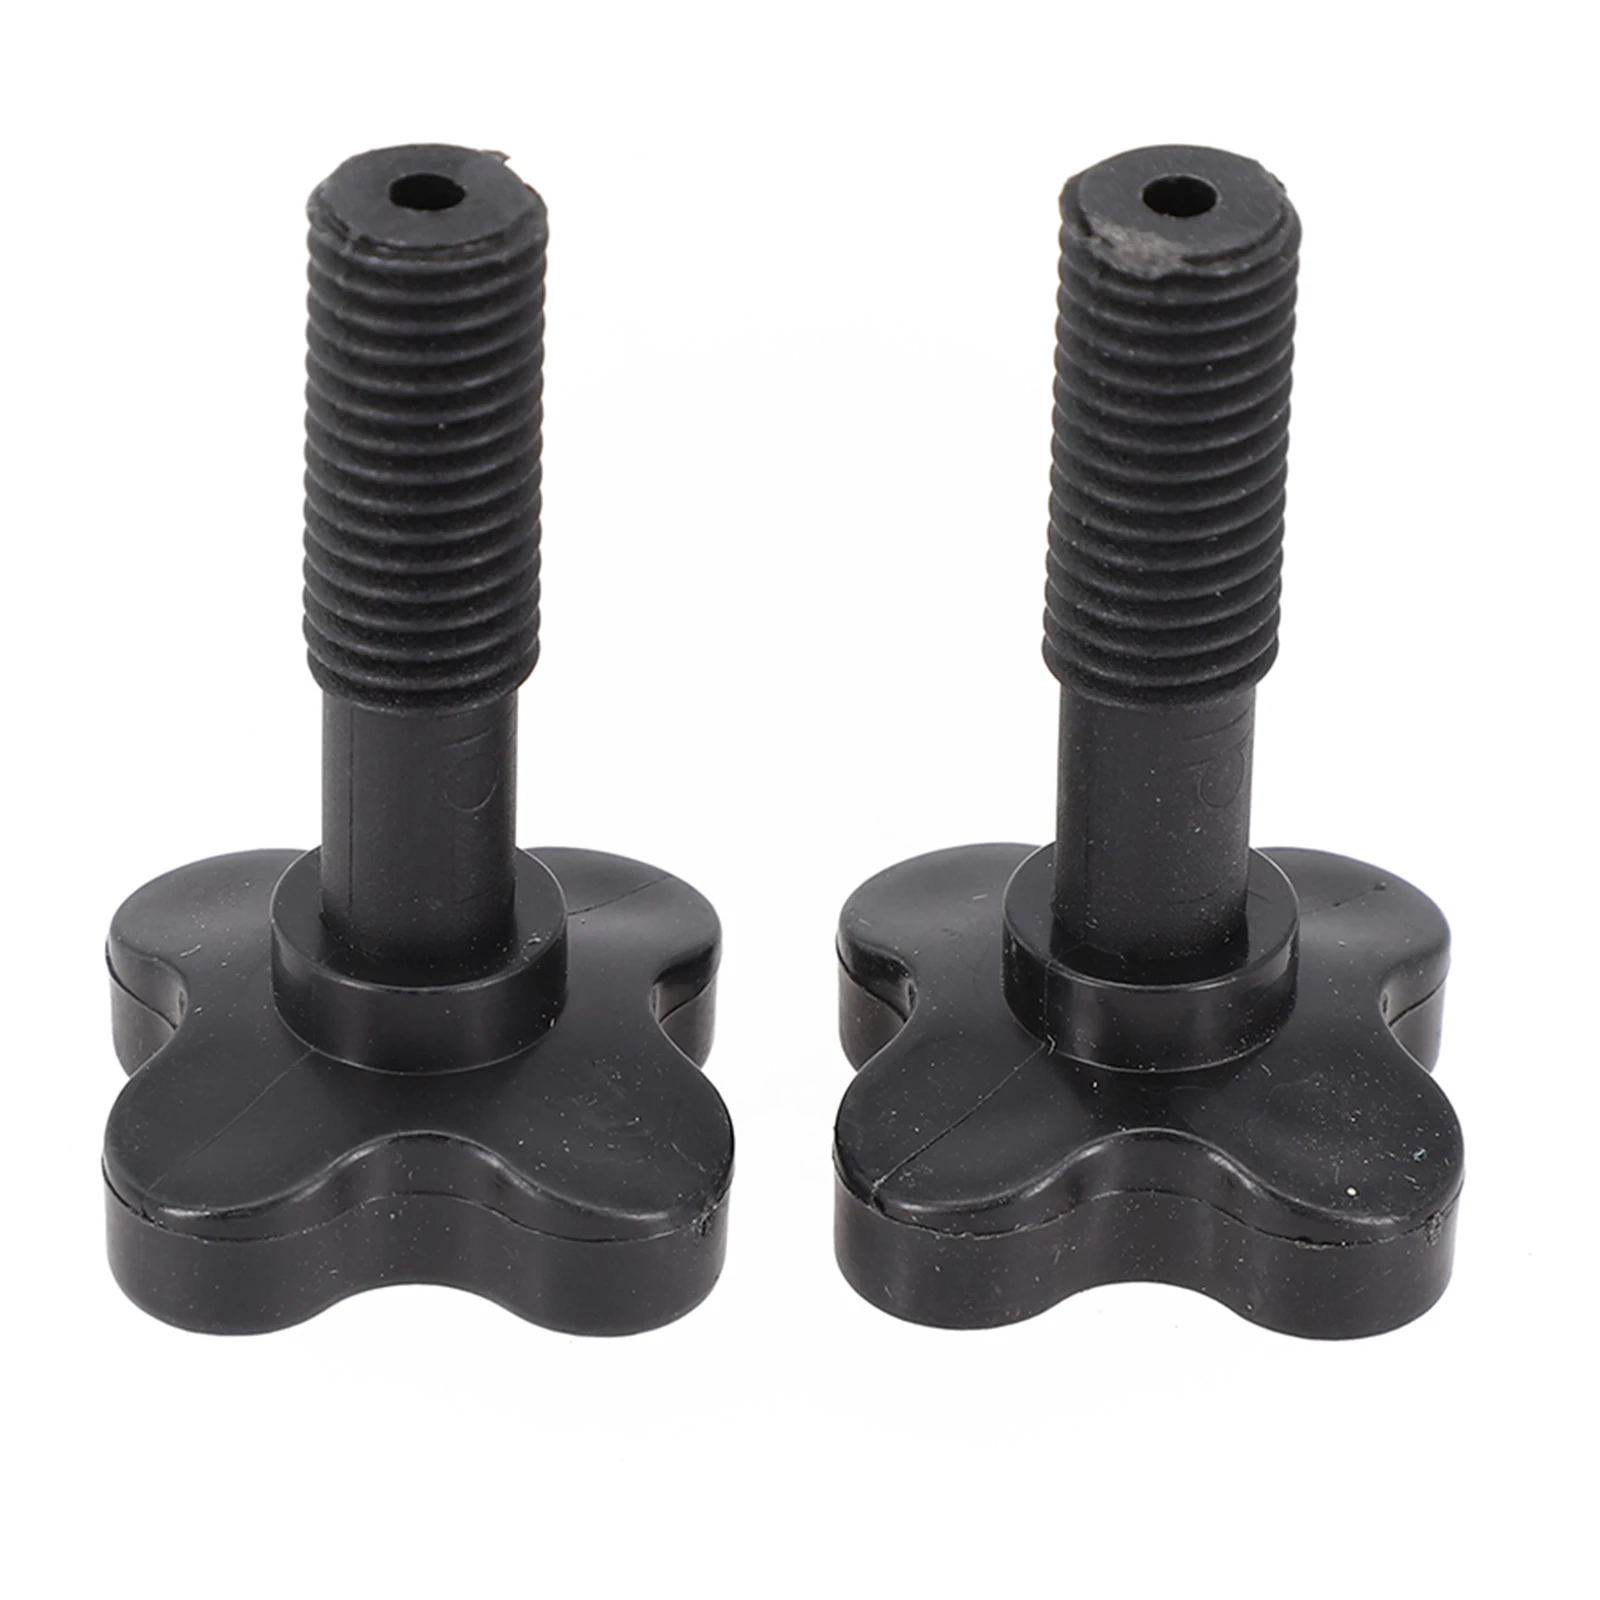 

Swing Chair Screw Screws Fix Plastic Screws Essential Black Plastic Canopy Fixing Screws for your For Garden Swing Chair